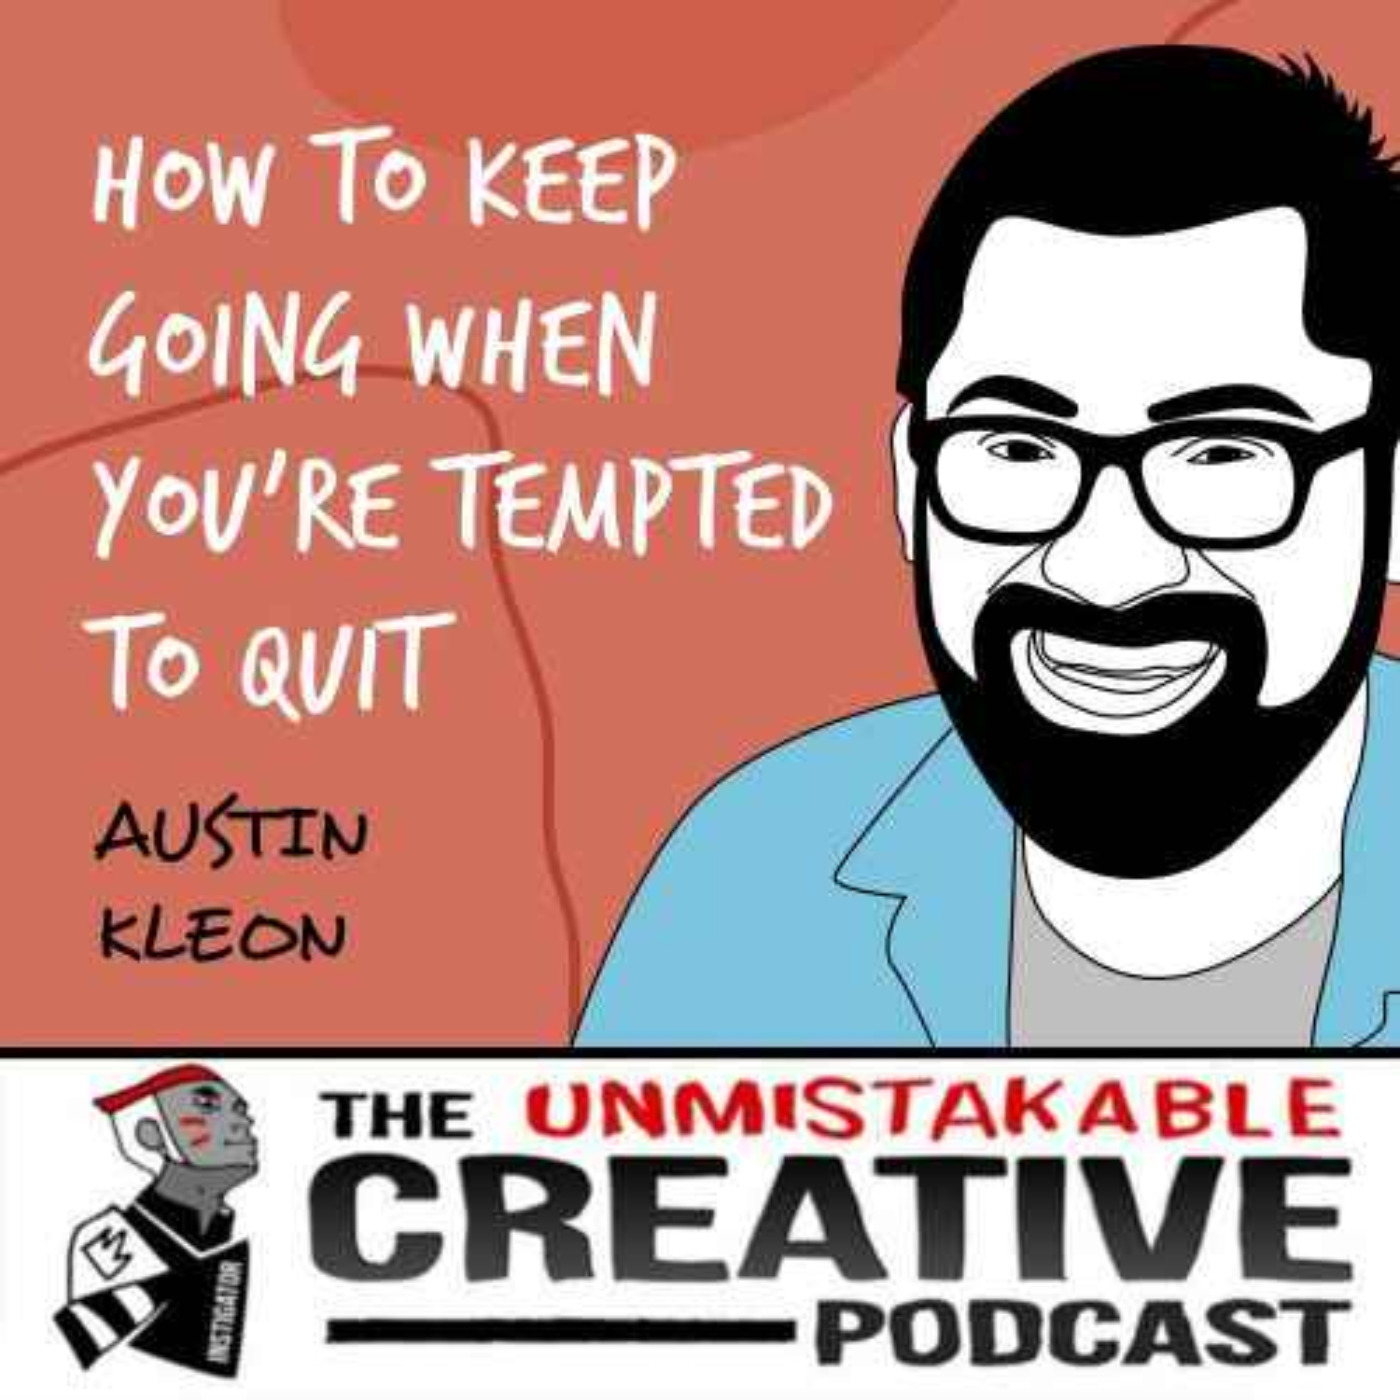 The Wisdom Series: Austin Kleon | How to Keep Going When You're Tempted to Quit Image